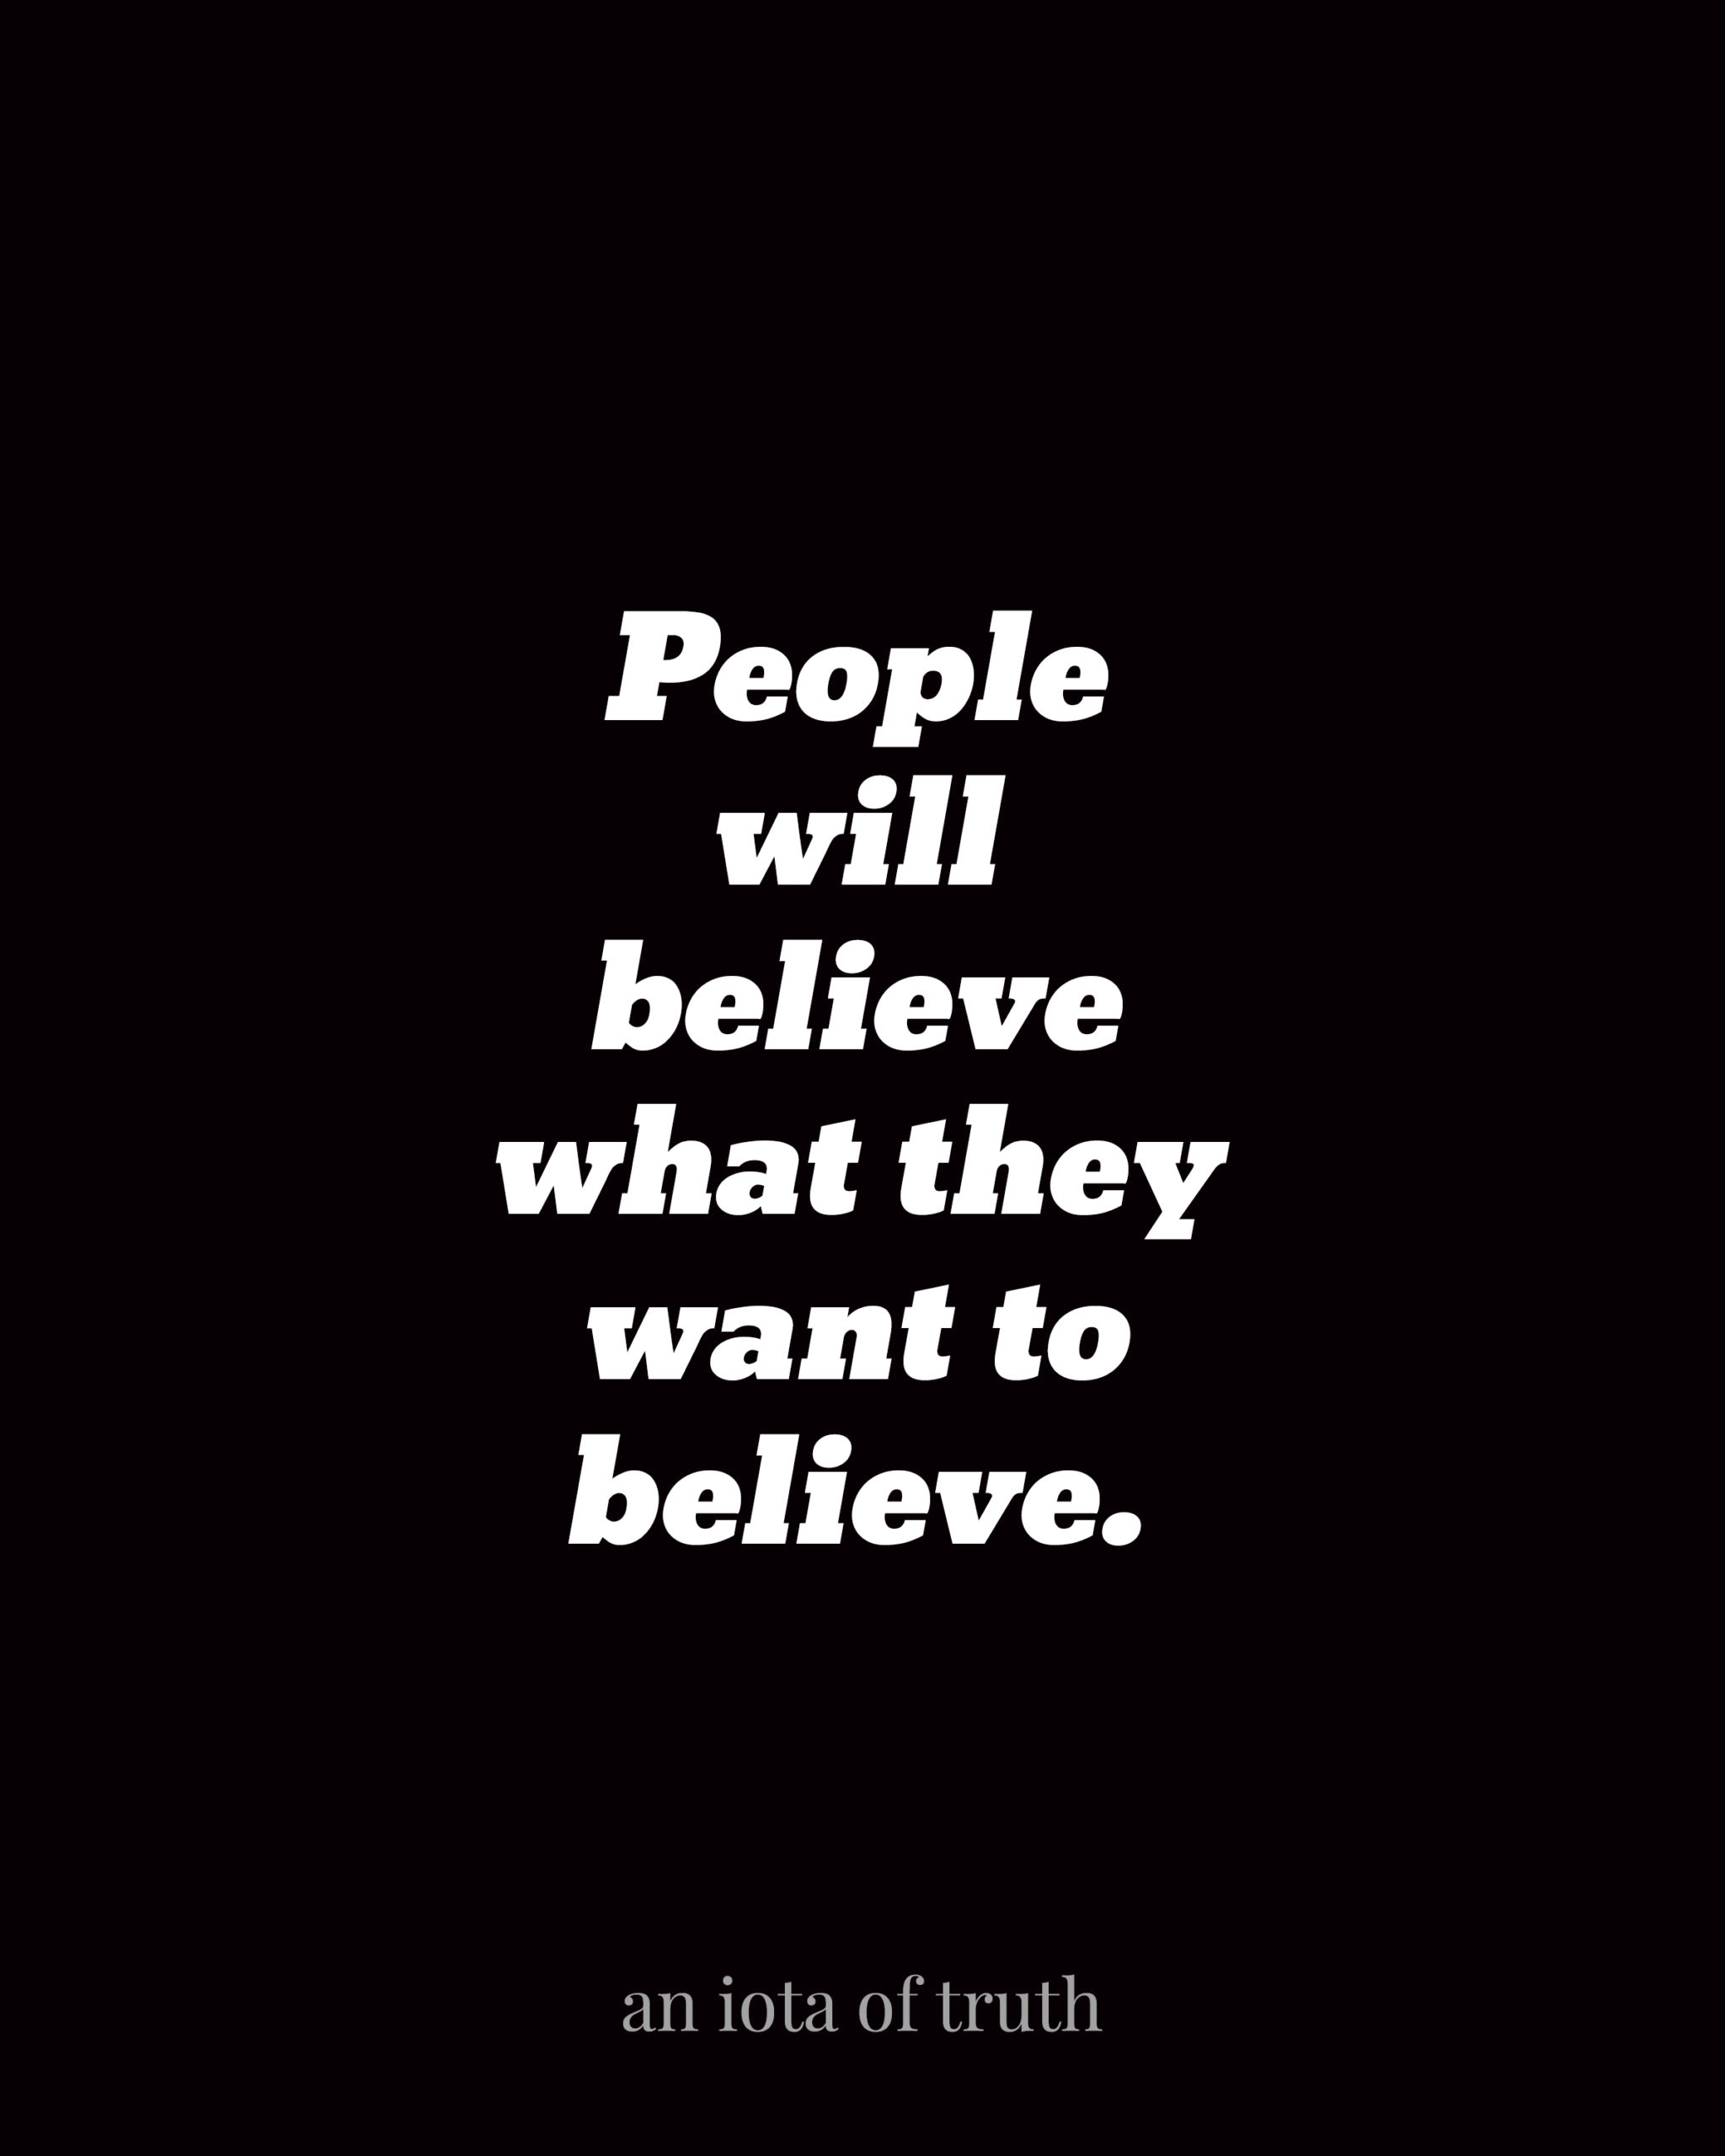 People will believe what they want to believe.